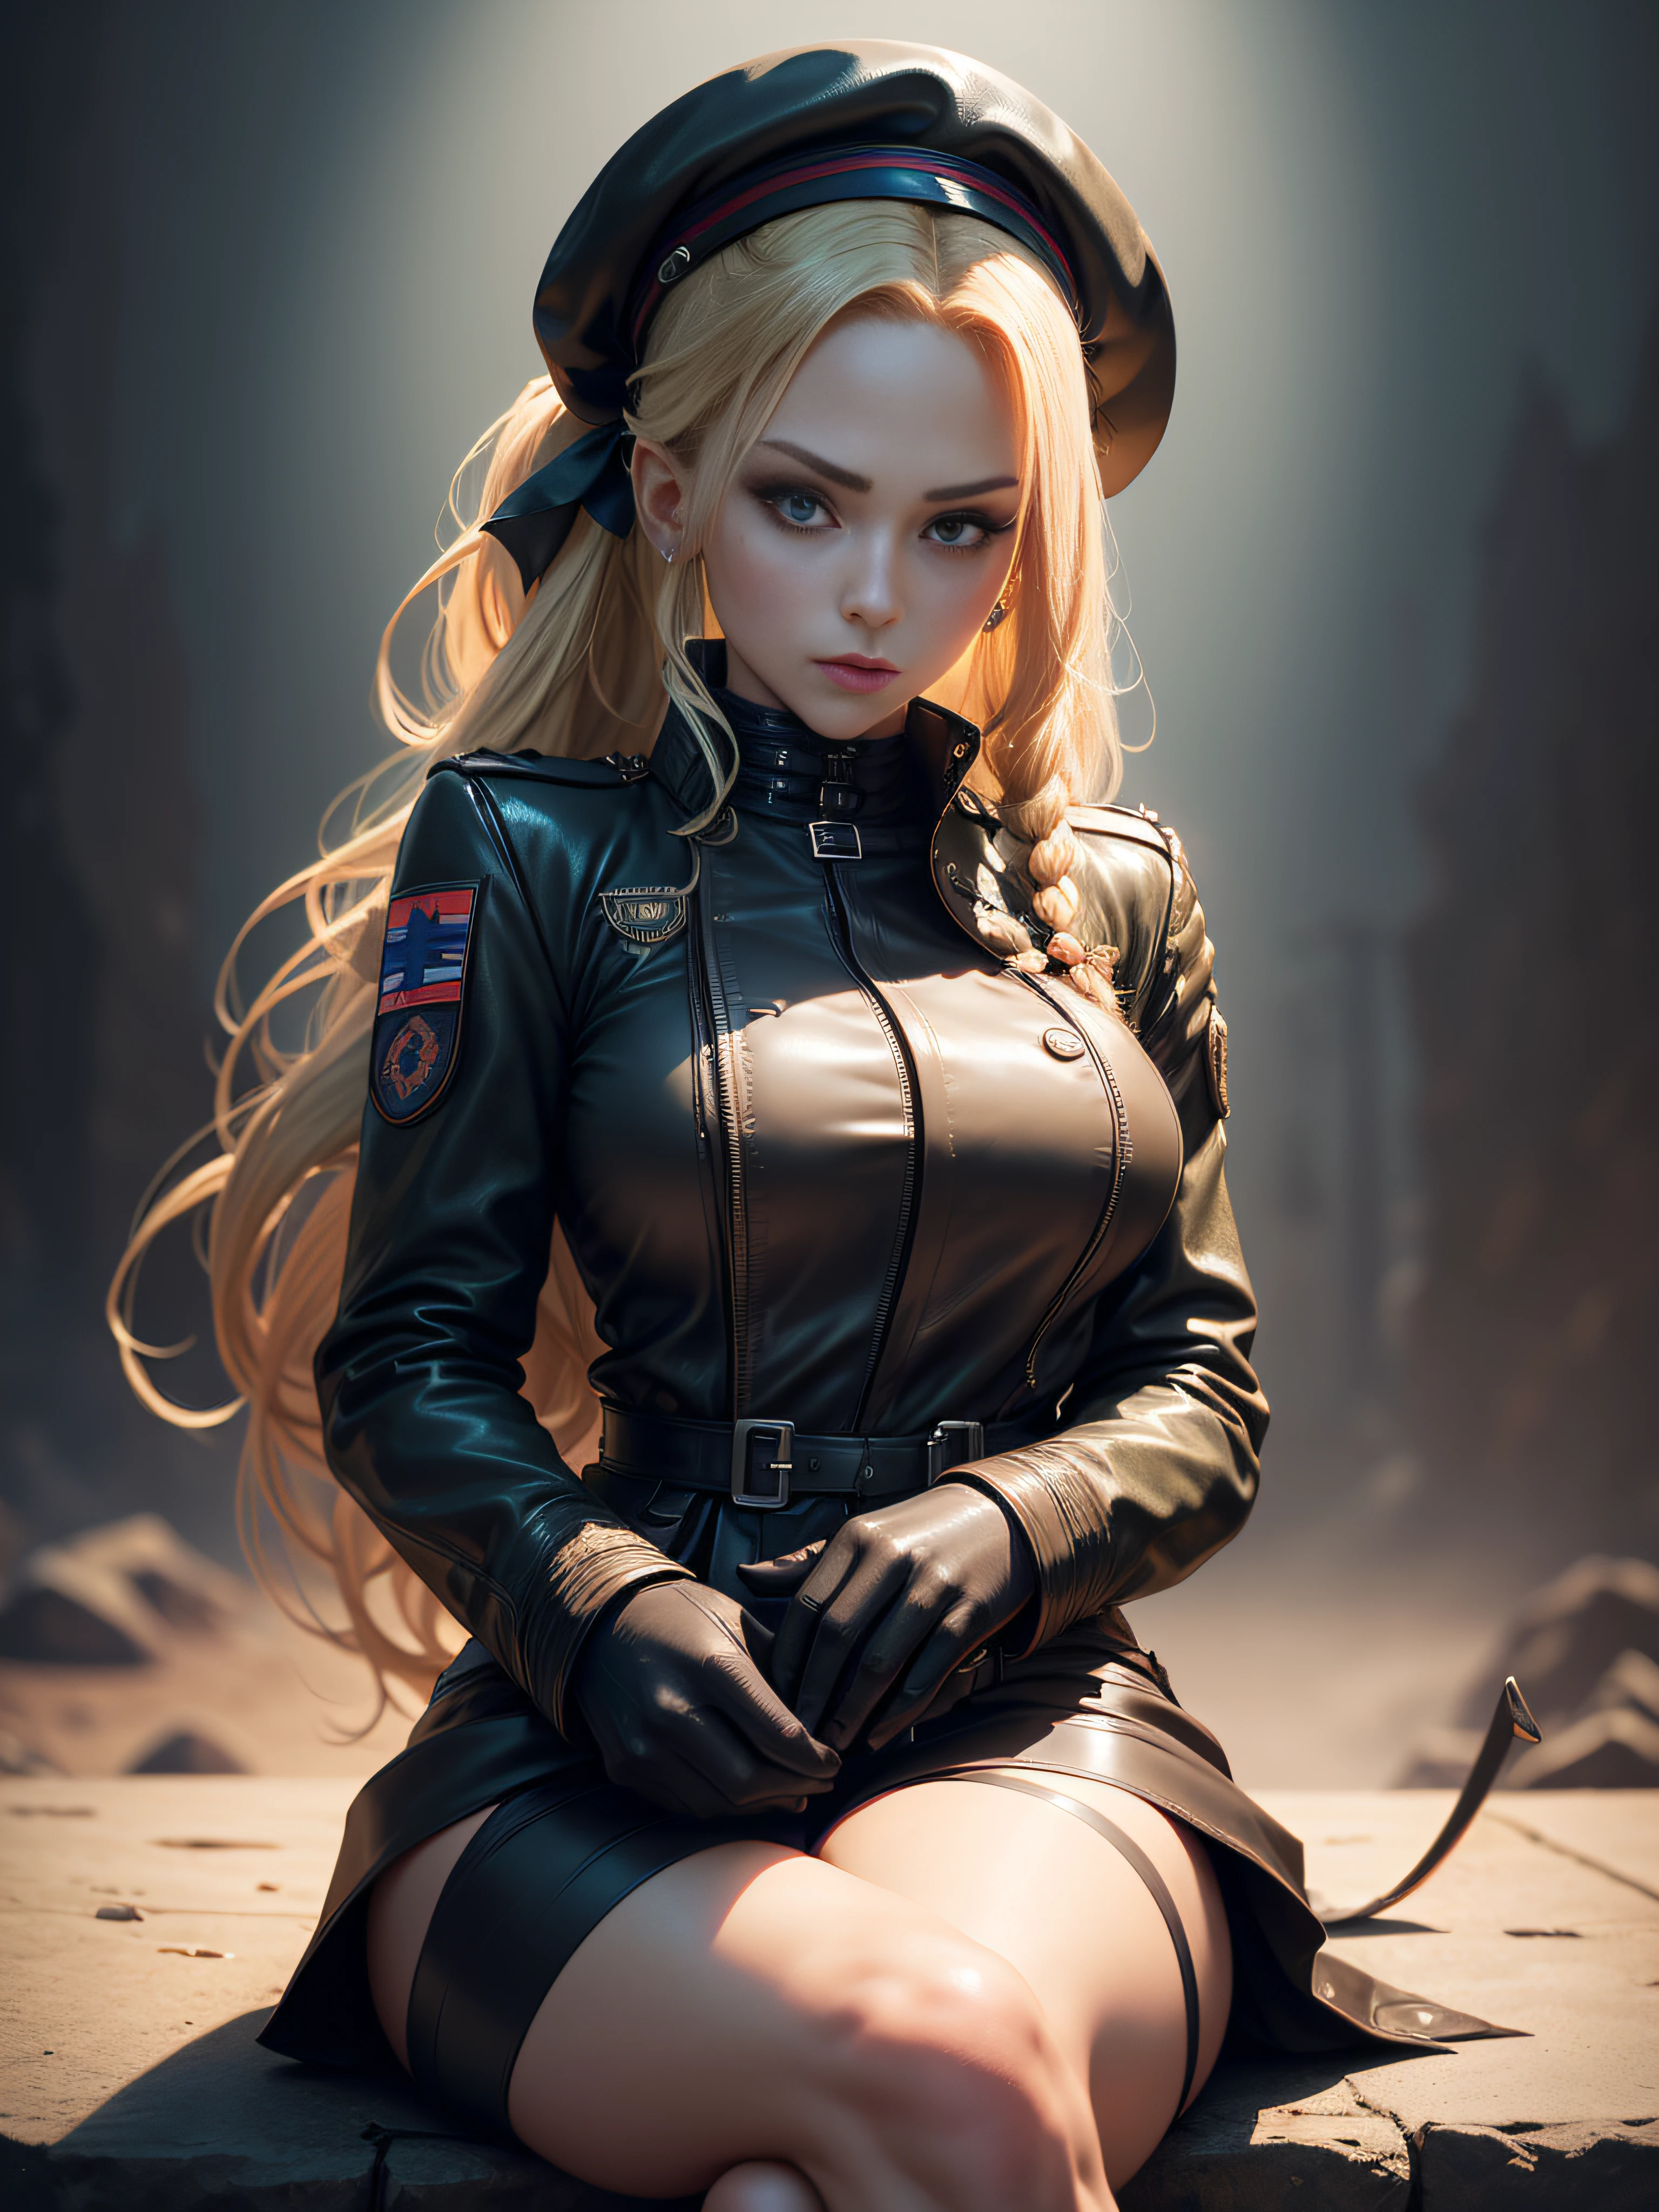 "(exquisitely detailed CG unity 8k wallpaper, masterpiece-quality with stunning realism), (best illumination, best shadow), (best quality), (elegant and demonic style:1.2), Arti modern anime. angled view, heroic pose, closeup full body portrait of stunningly beautiful 30 year old cammy from street fighter, Masterpiece, best quality, highres, mature Cammy white, twin braids, long hair, blonde hair, antenna hair, beret, (red headwear:1), blue eyes, scar on cheek, green military leotard, red gloves, fingerless gloves, camouflage, (fully clothed:1), abs, depth of field blur effect, night, full zoom, action portrait, photorealistic. cinematic lighting, highly detailed. best quality, 4k, Better hand, perfect anatomy, leaning forward, foreshortening effects, coy flirty sexy expression, foreshortening effect, (piercing eyes:0.8), surrounded by an ominous and dark atmosphere, accentuated by dramatic and striking lighting, imbued with a sense of surreal fantasy". wearing laced military boots:1.5), sitting (wearing a British Military jacket:1.5) (mature face:0.5)